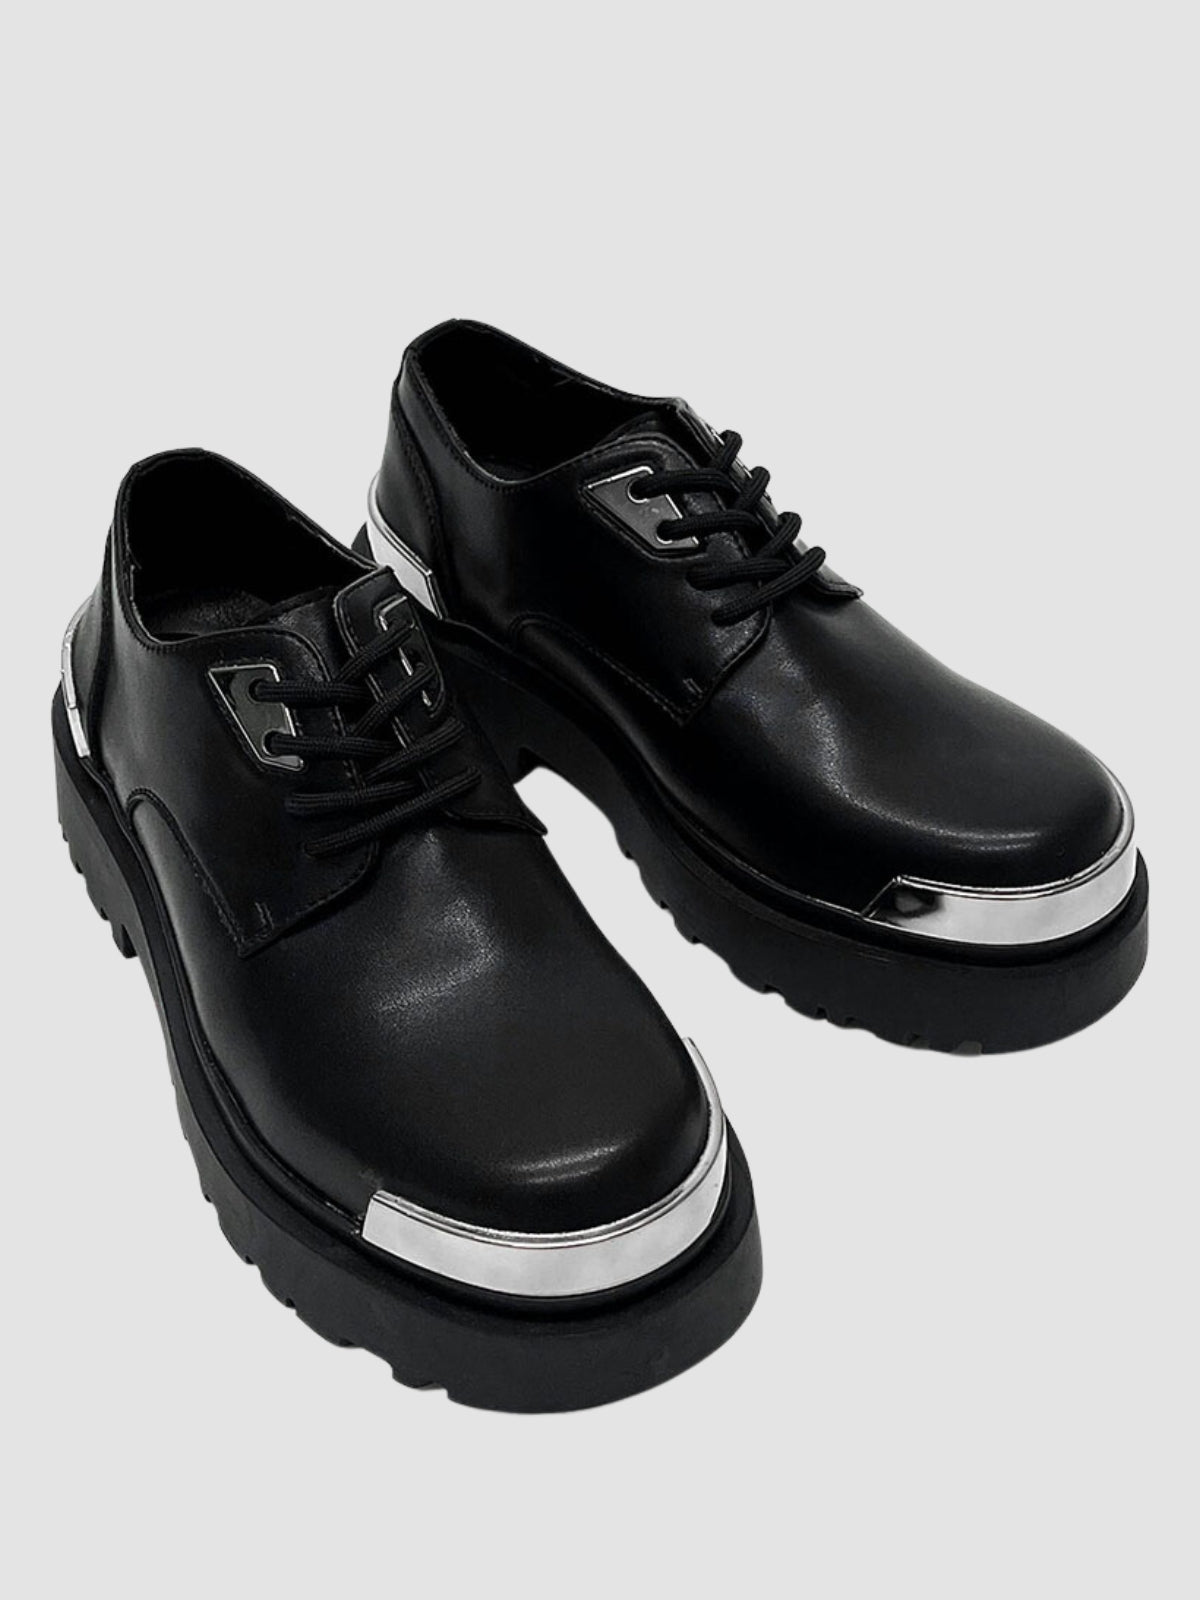 WLS Retro High End Heightening Leather Shoes